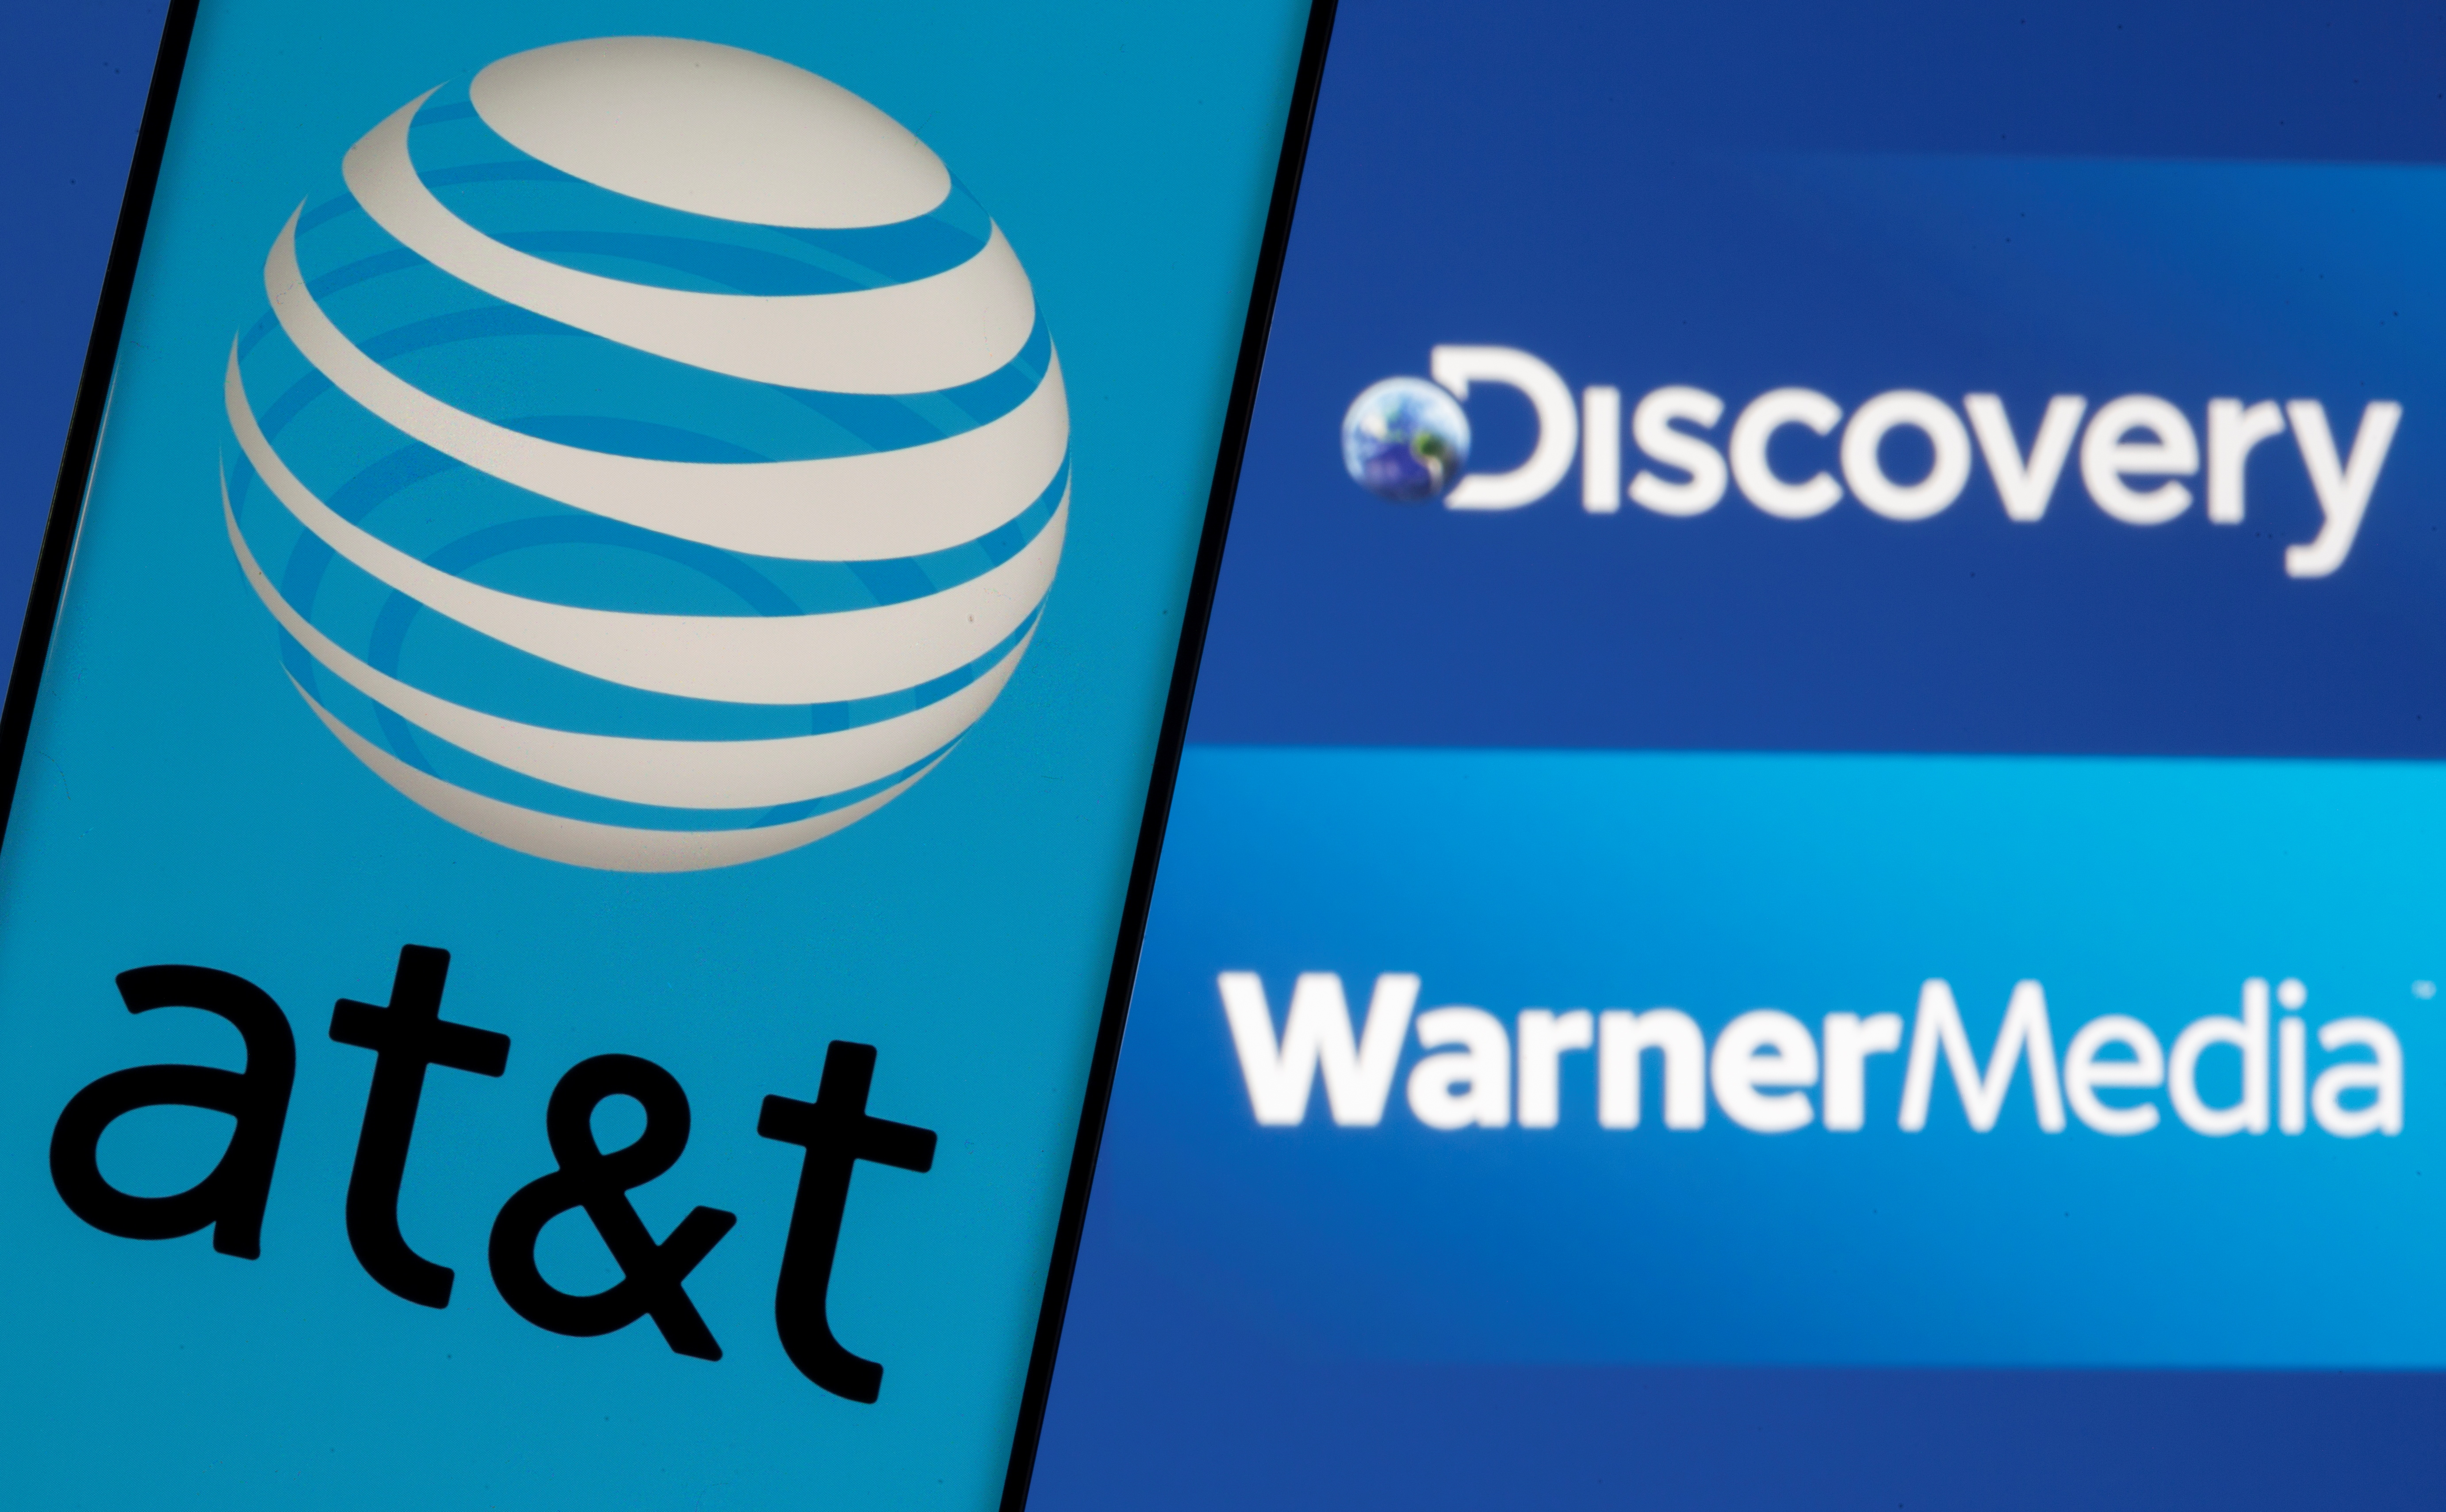 AT&T logo is seen on a smartphone in front of displayed Discovery and Warner Media logos in this illustration